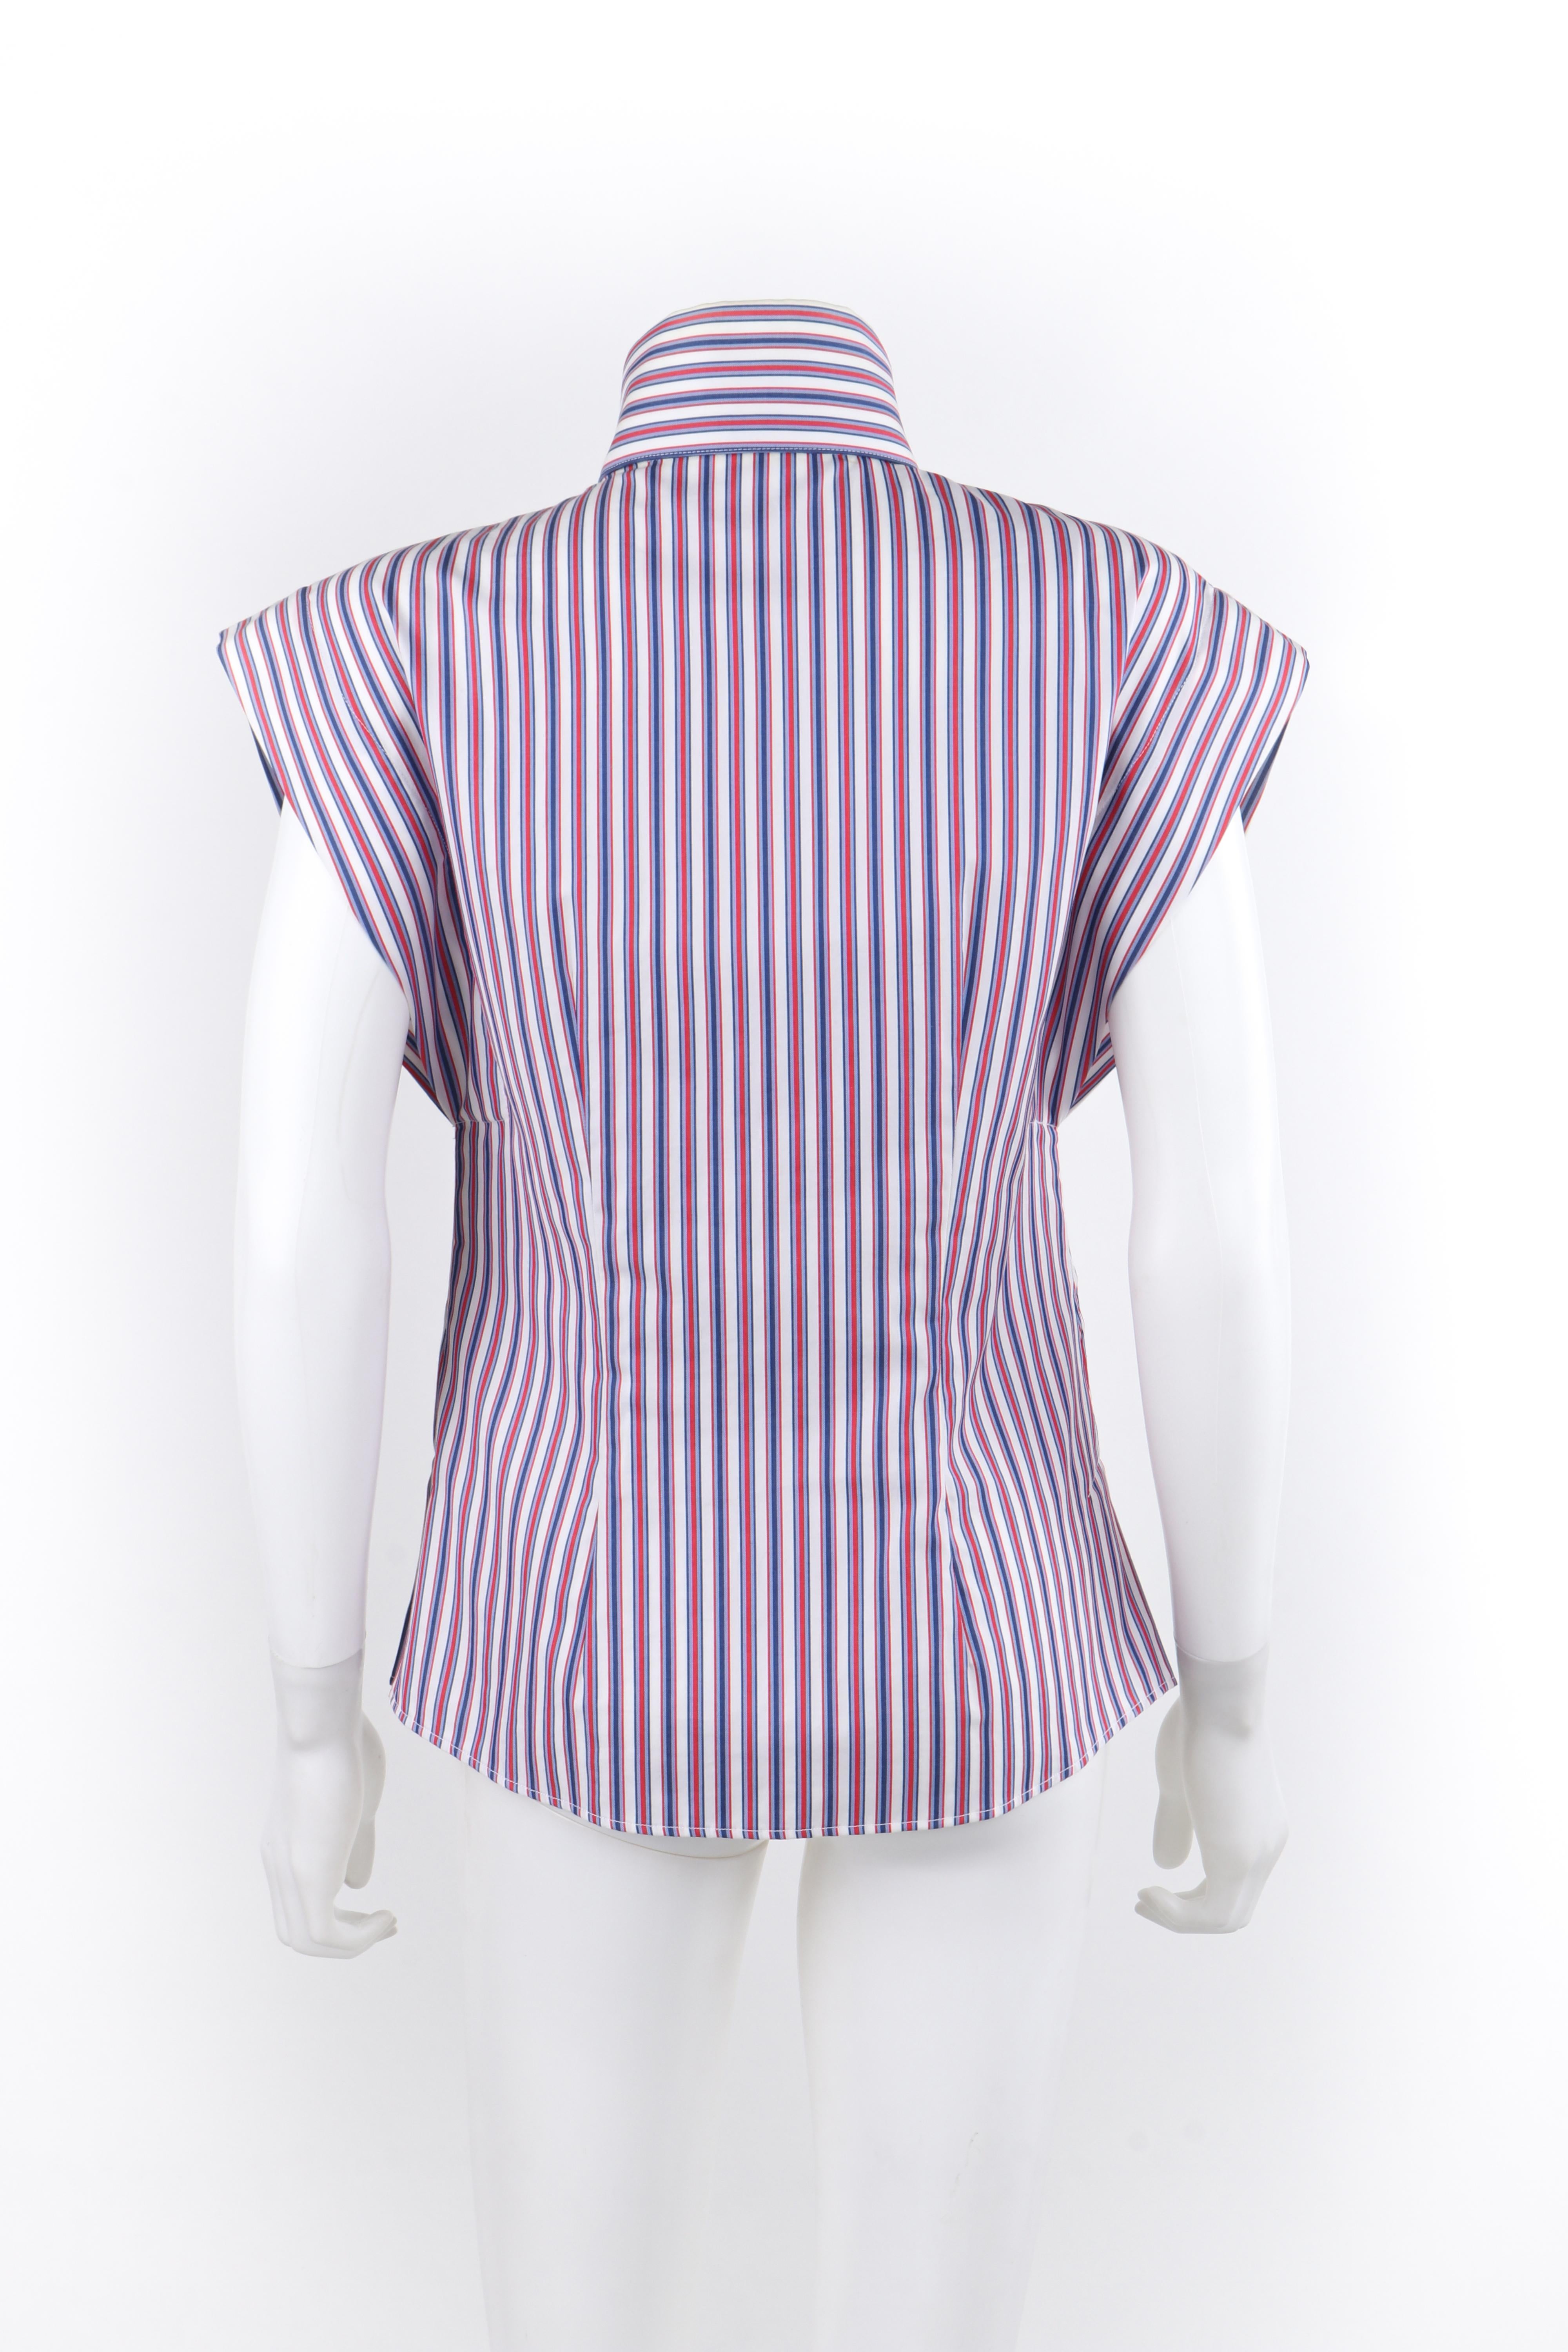 ALEXANDER McQUEEN Resort 2010 Red White Blue High Neck Button Down Blouse Top For Sale 2